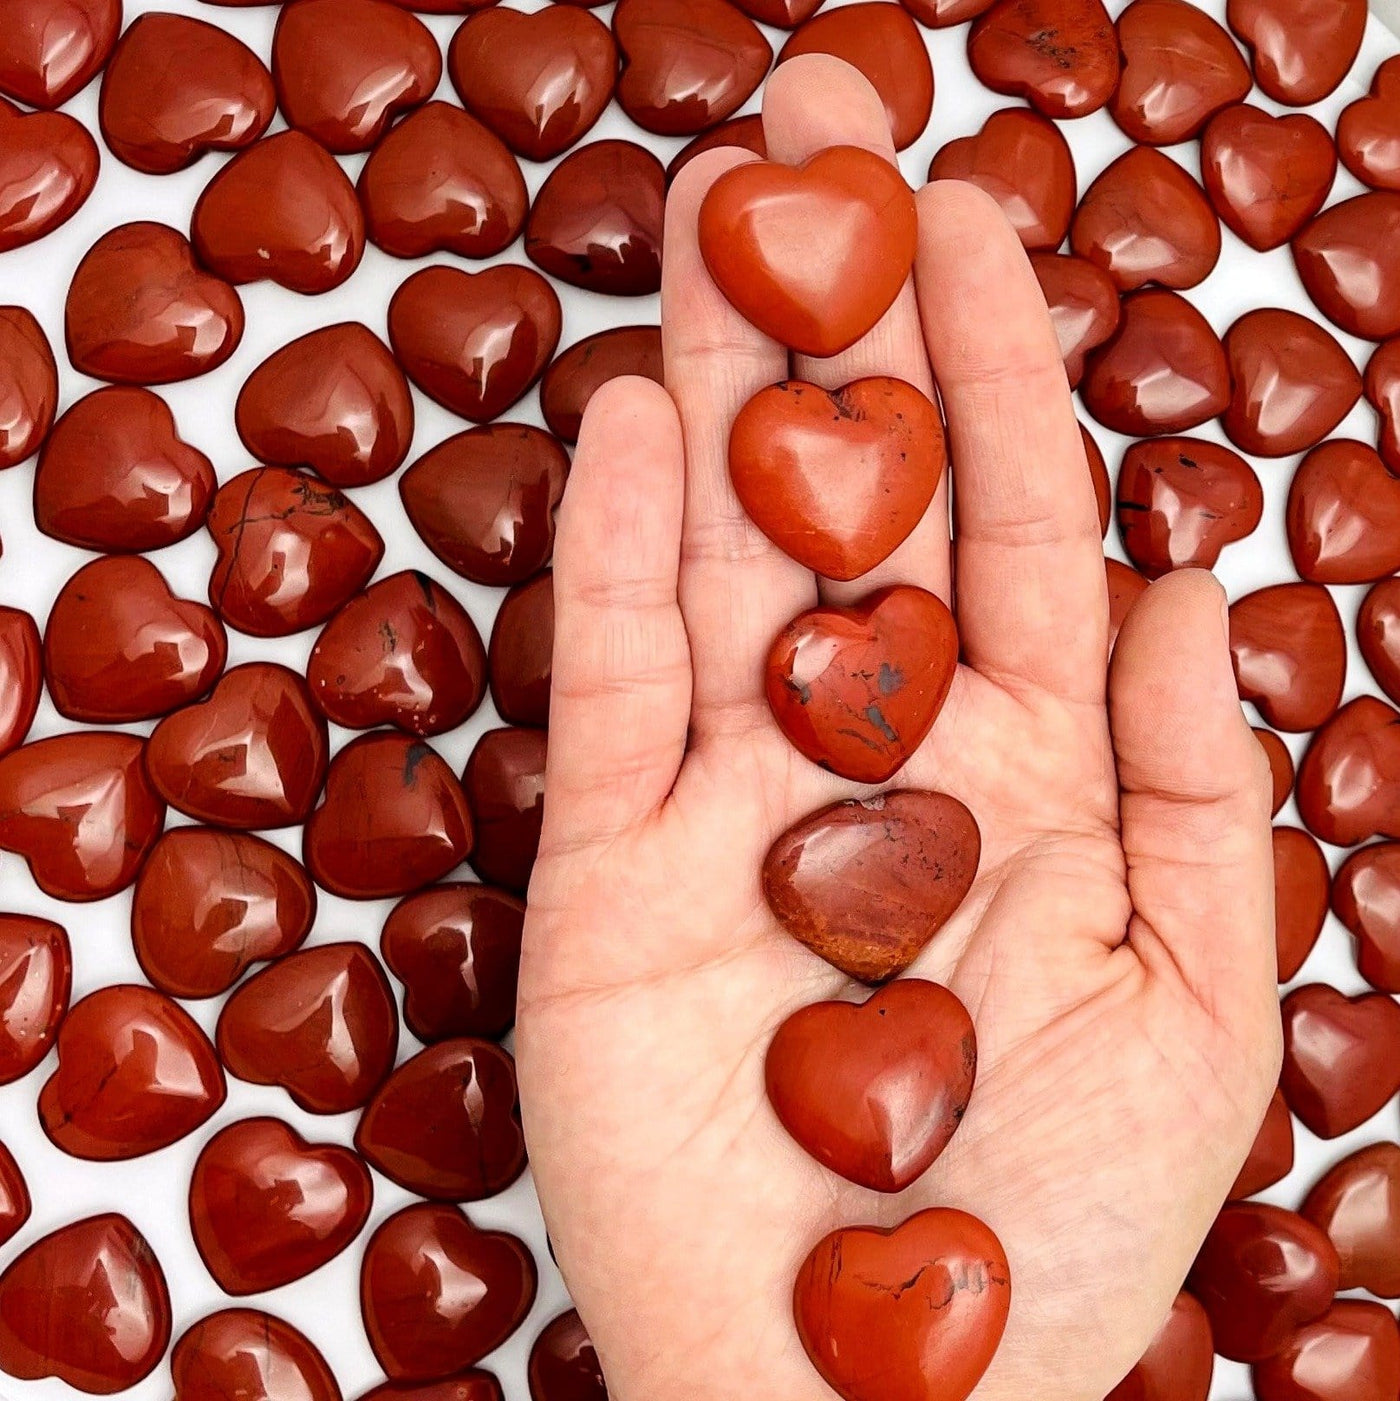 Hand holding up 6 Red Jasper Heart Shaped Stones in front of more scattered on white background